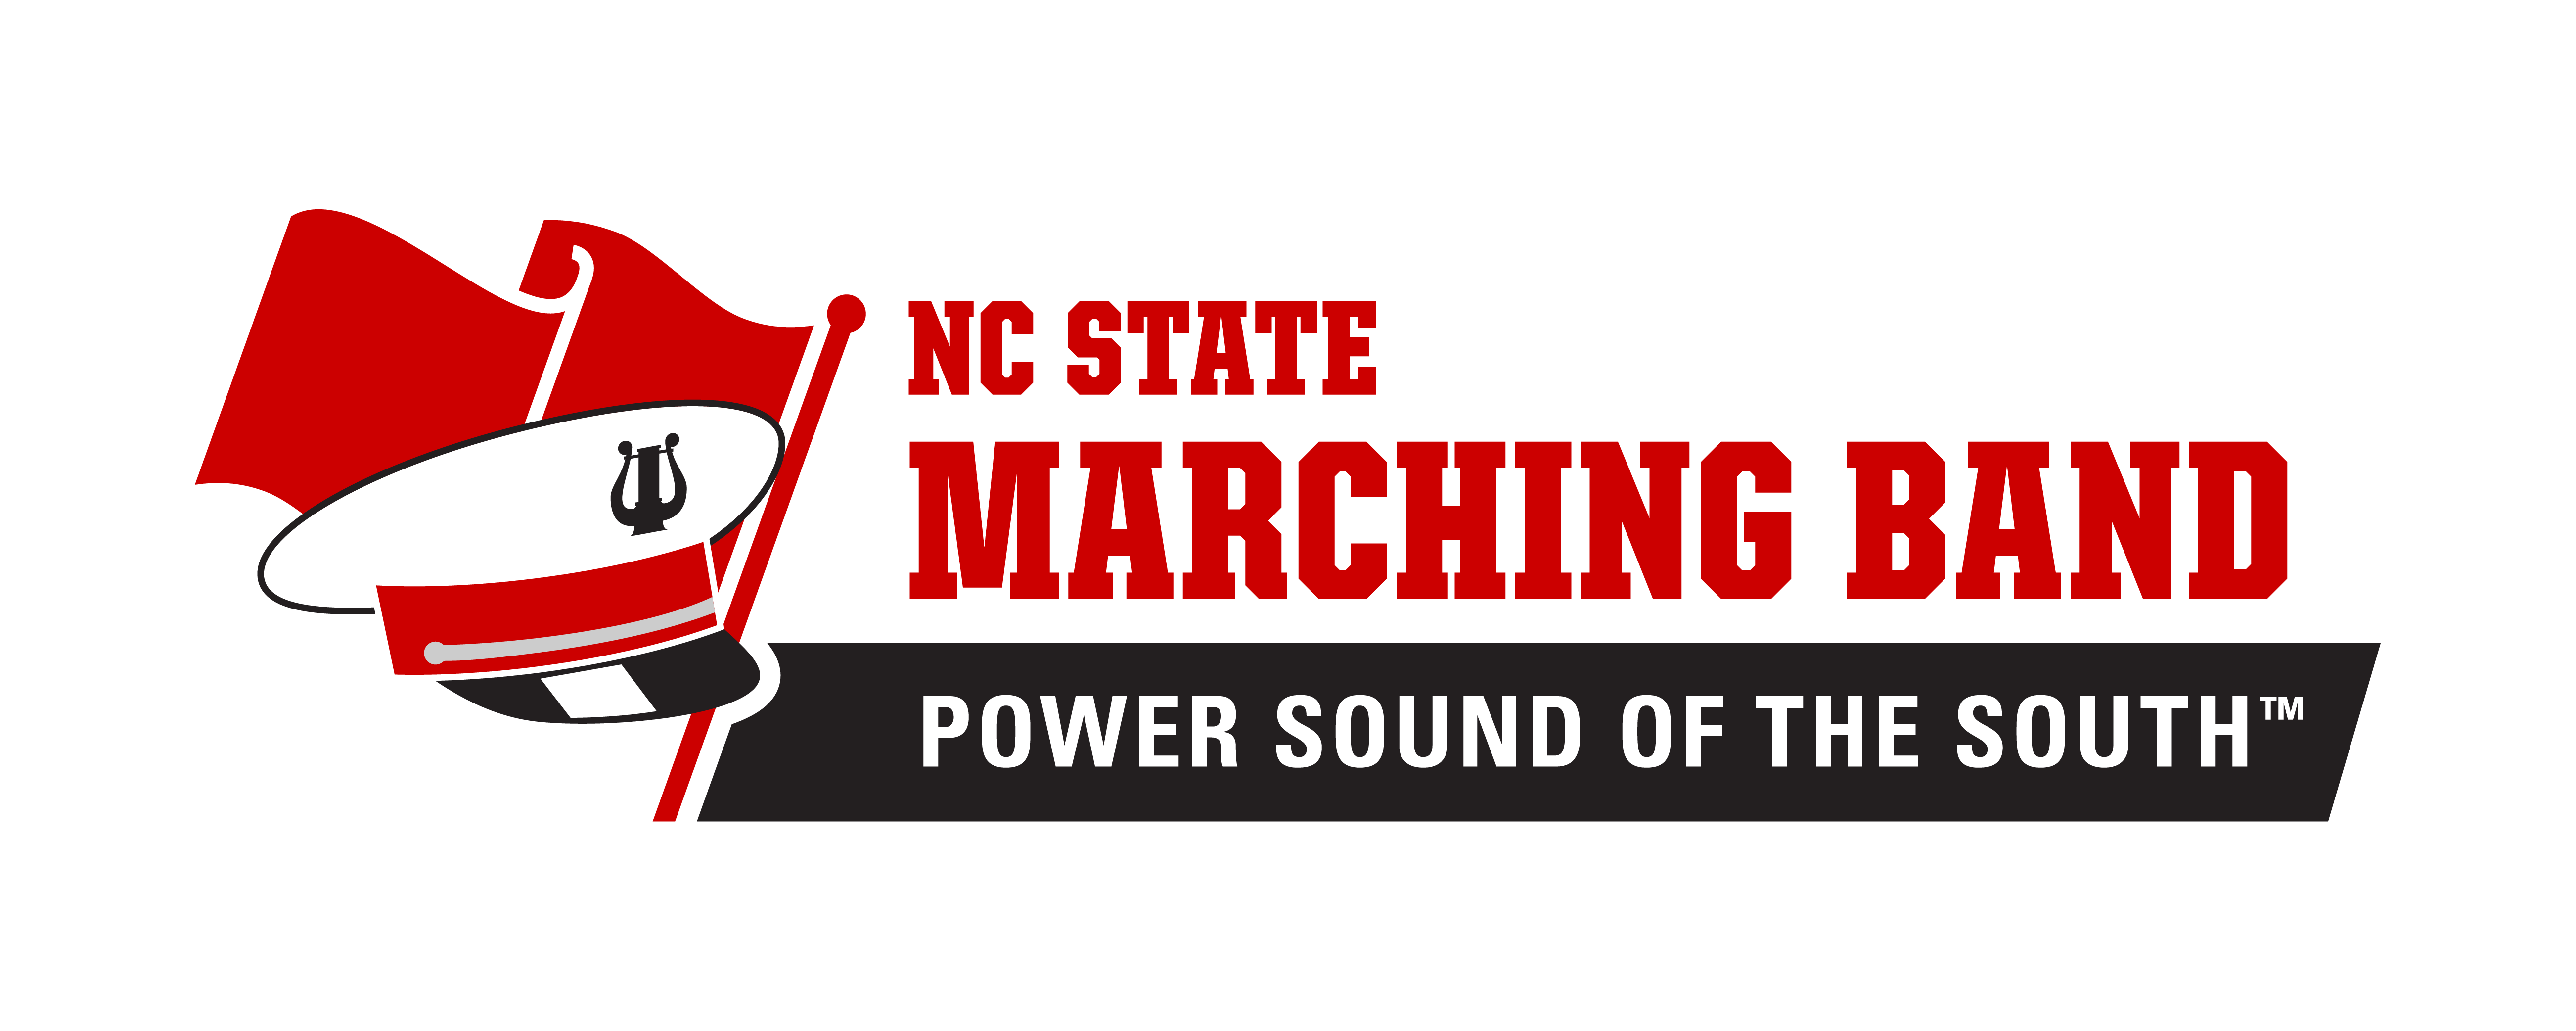 Logo for the Power Sound of the South featuring uniform cap and color guard flag